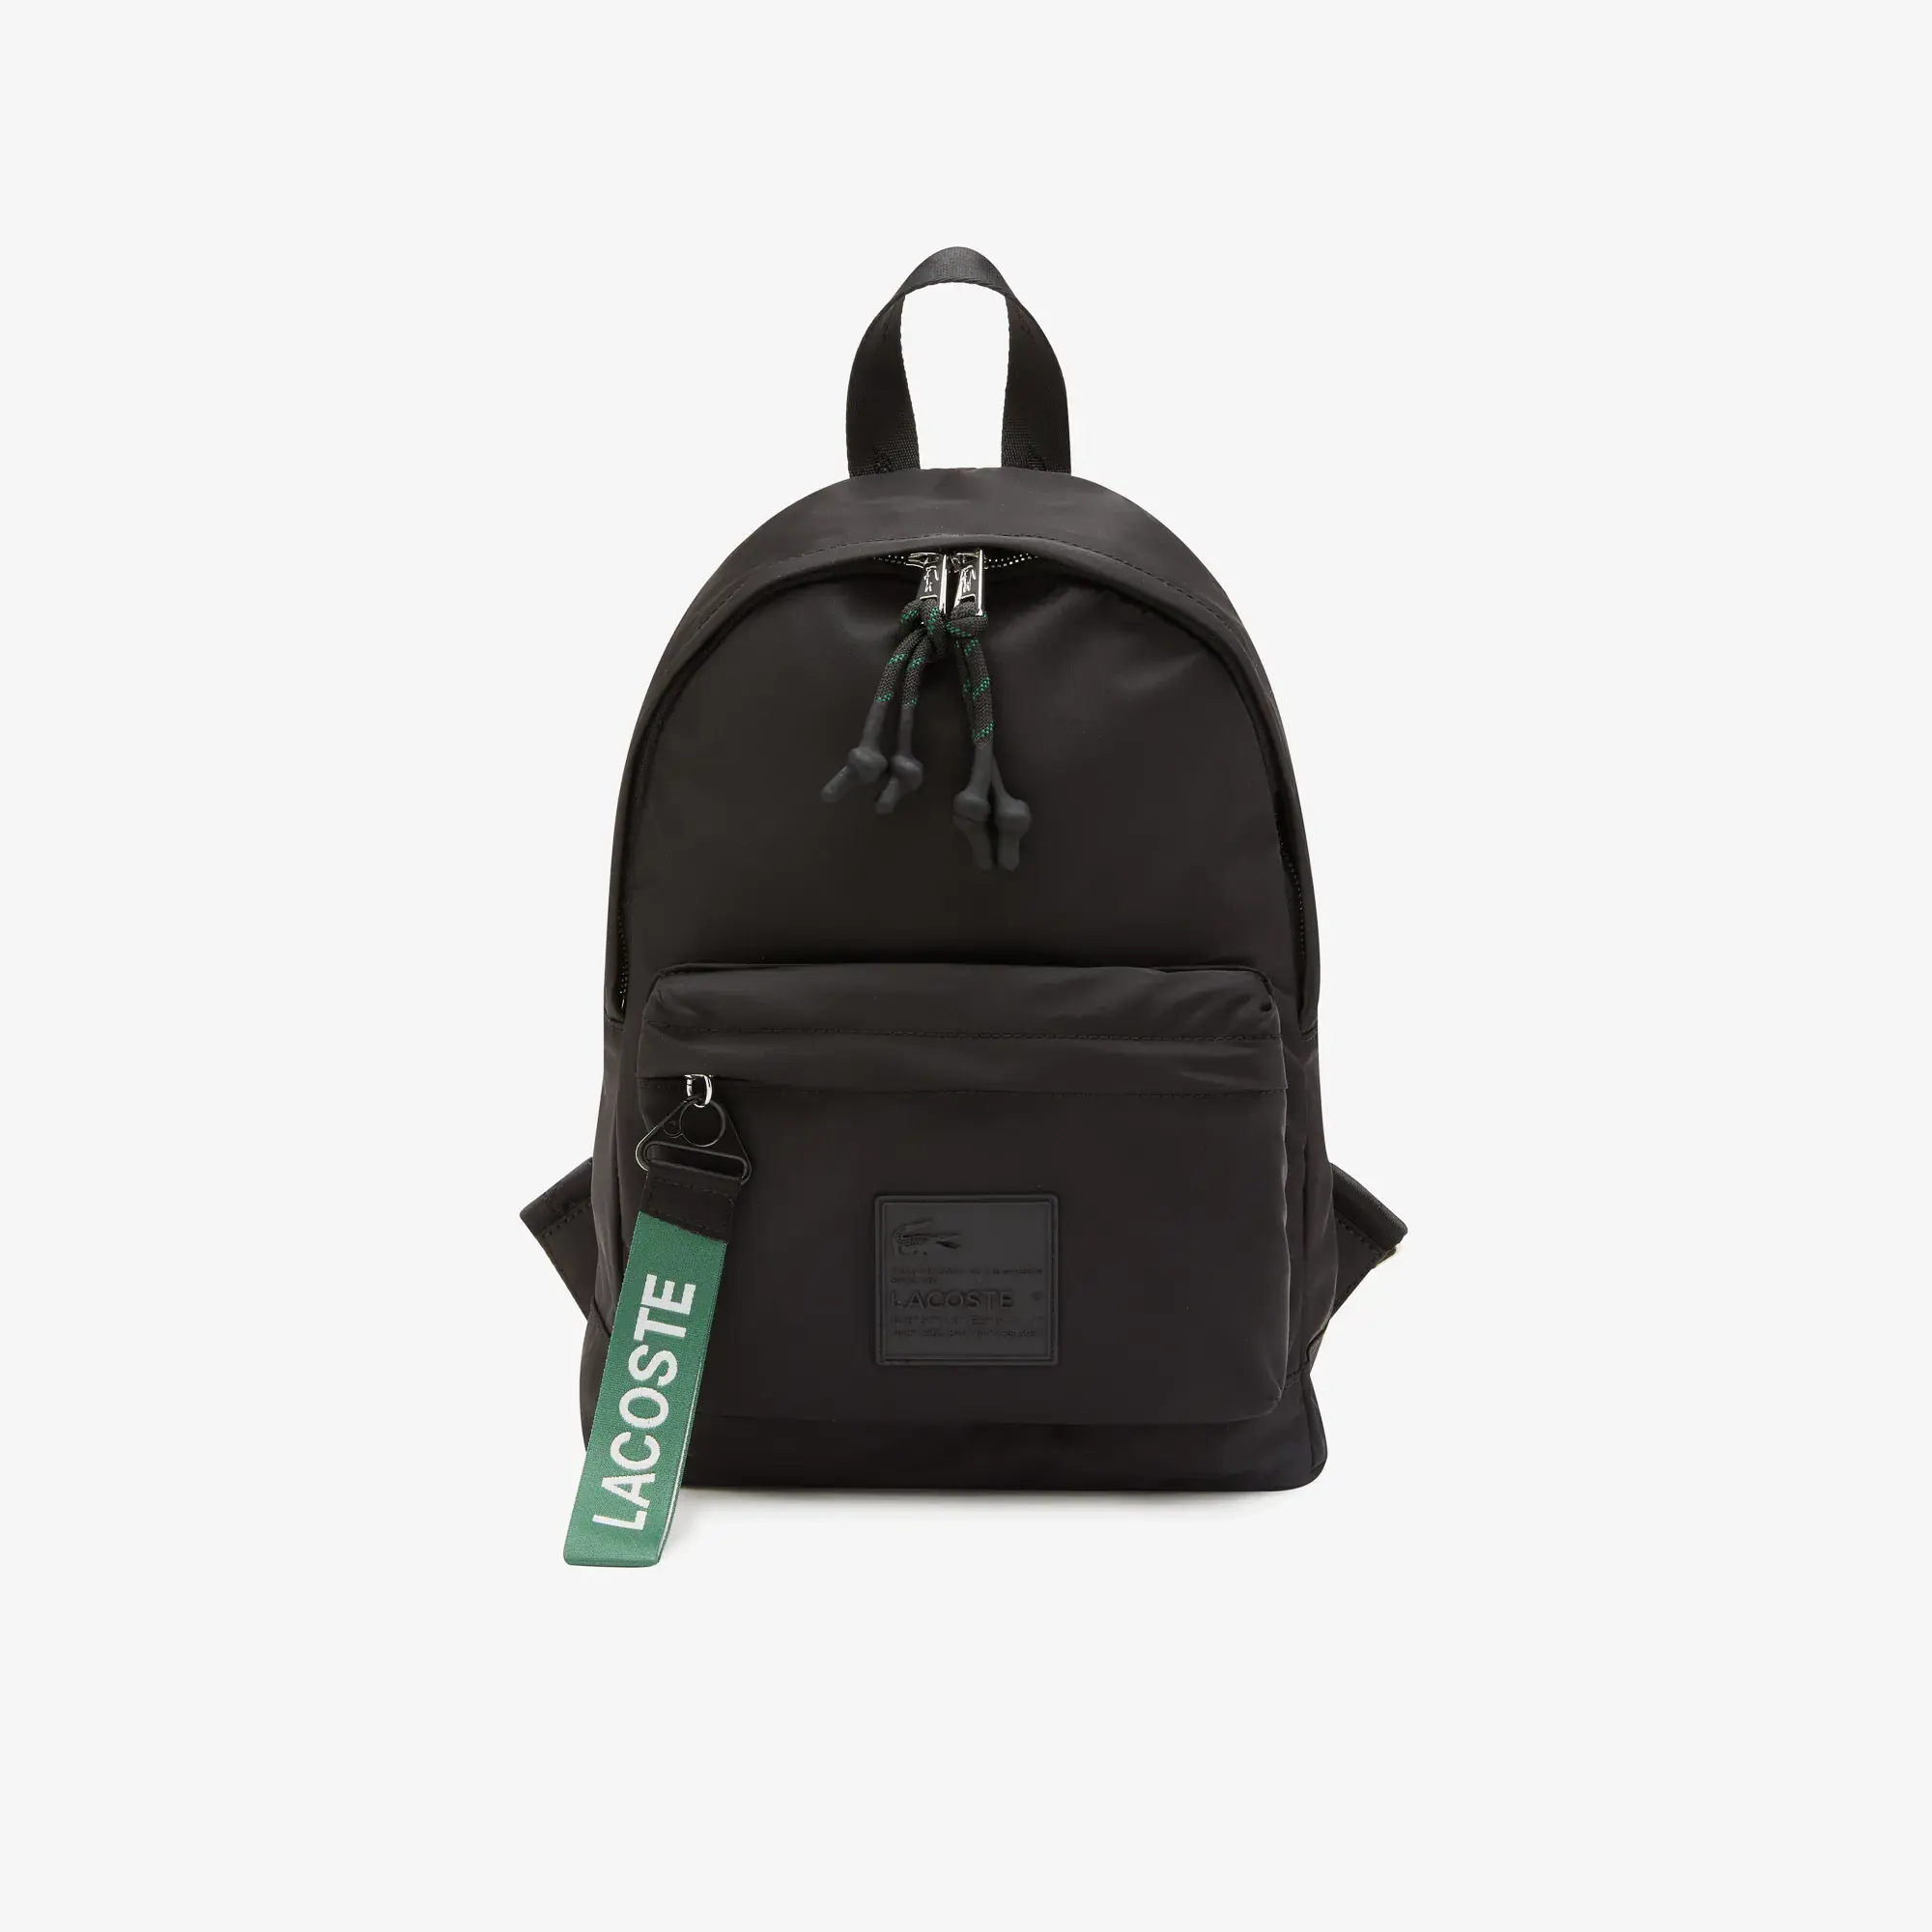 Lacoste Women's Signature Patch Backpack. 1